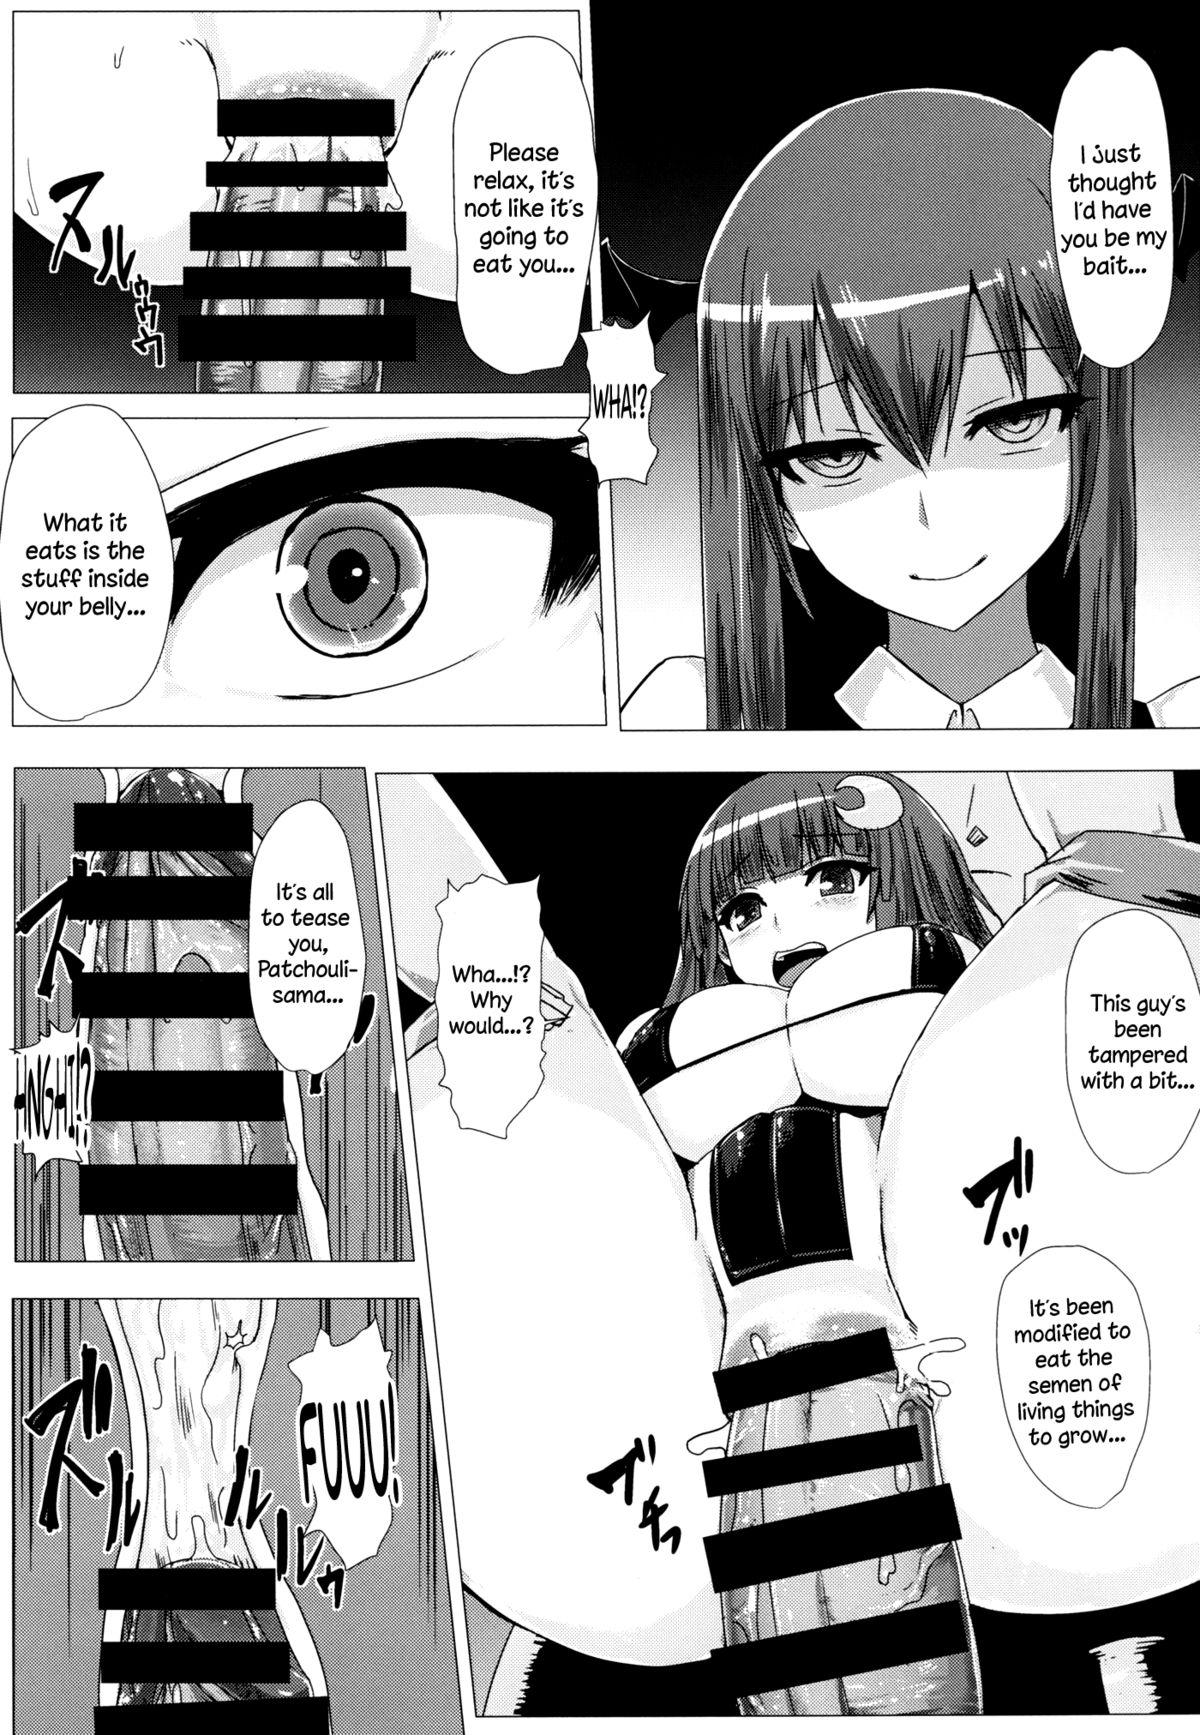 Blacksonboys Shiri Pache Pache | Ass Patchy Patchy - Touhou project Casal - Page 10